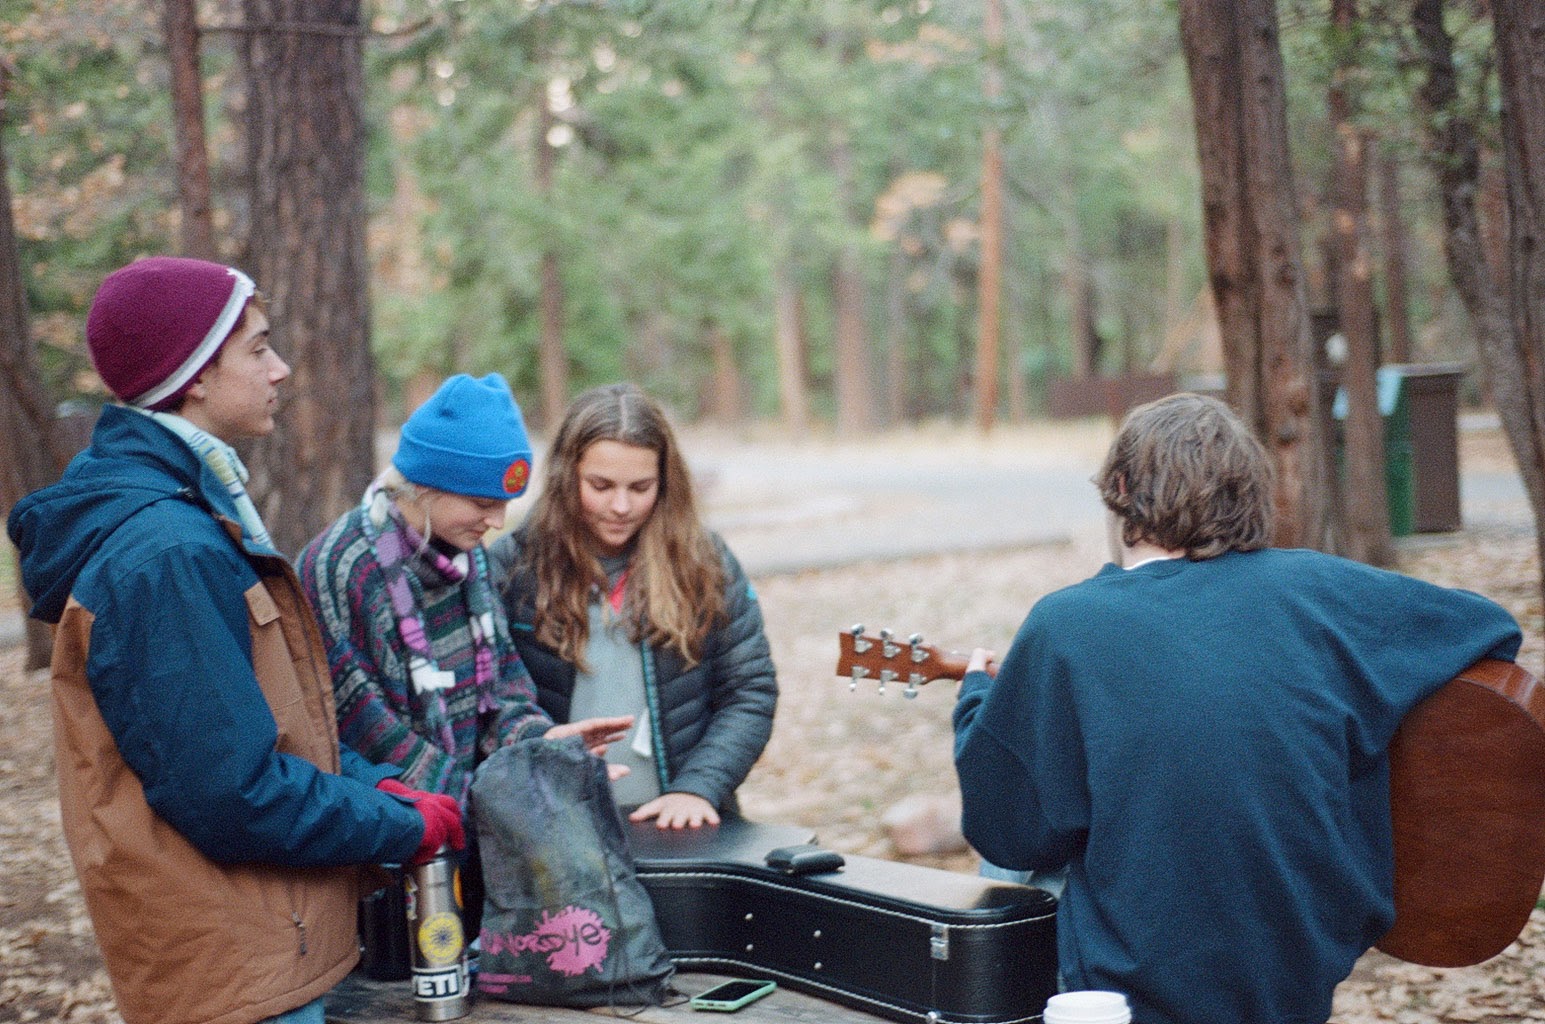 The group sitting in the forest and playing guitar